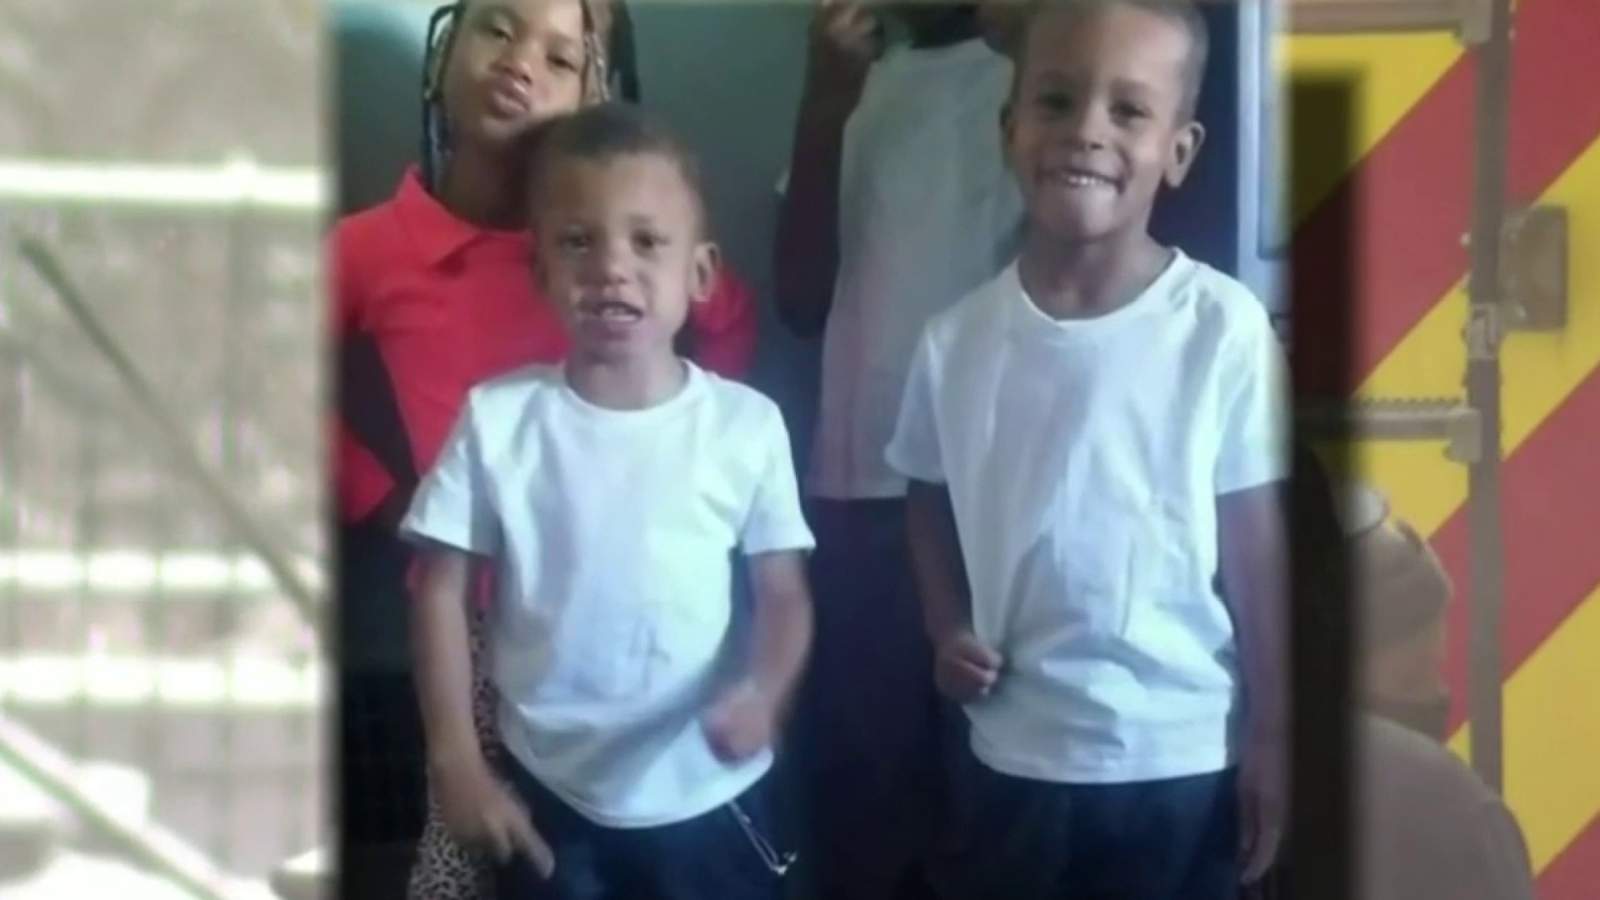 Family grieves for 2 boys killed in house fire in Detroit on Christmas